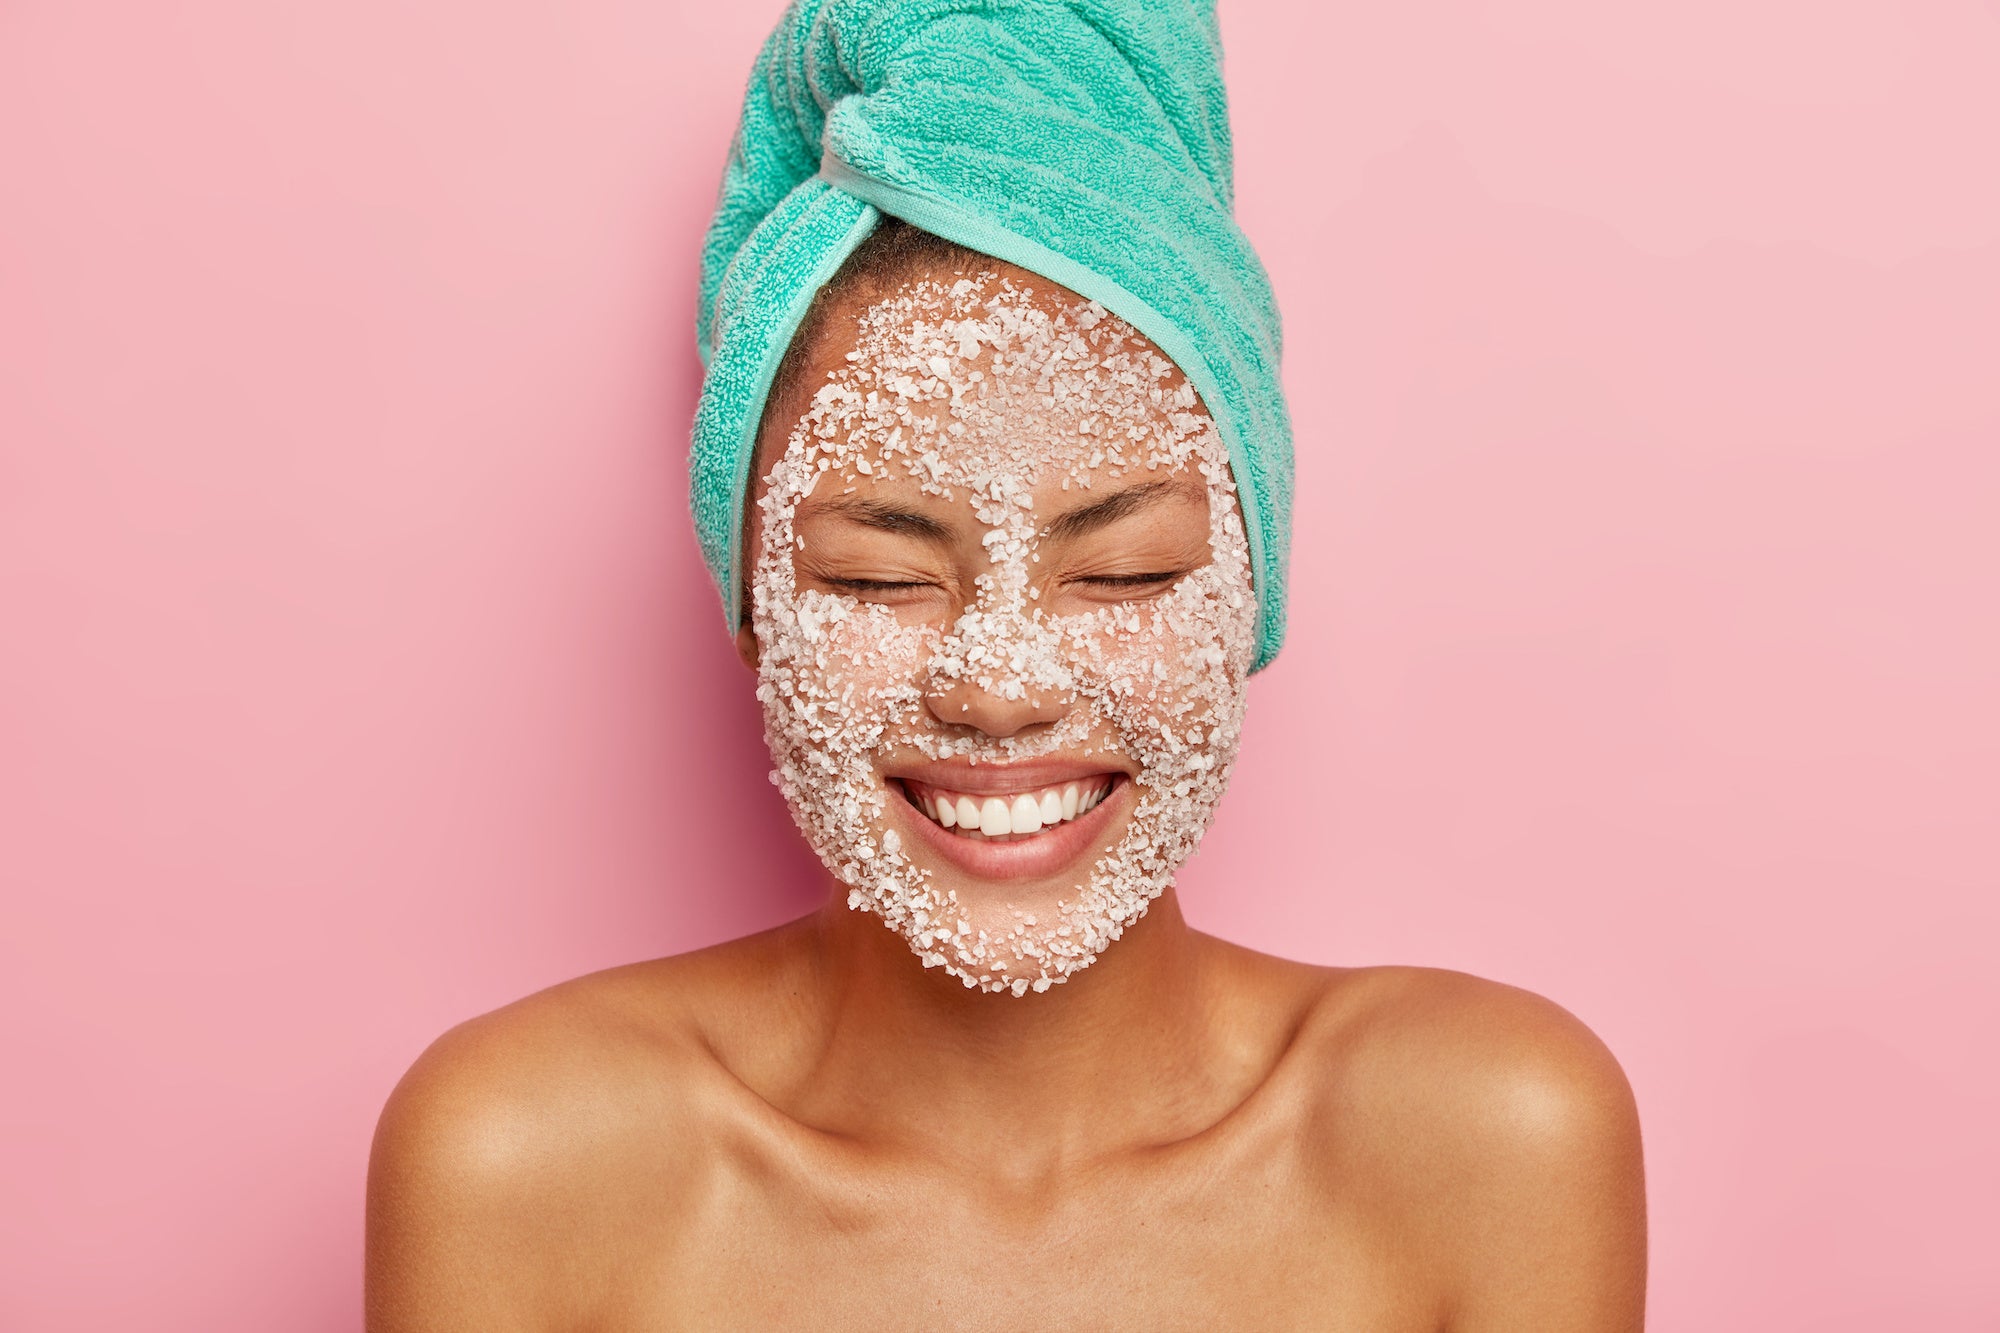 What Are The Benefits Of Exfoliation